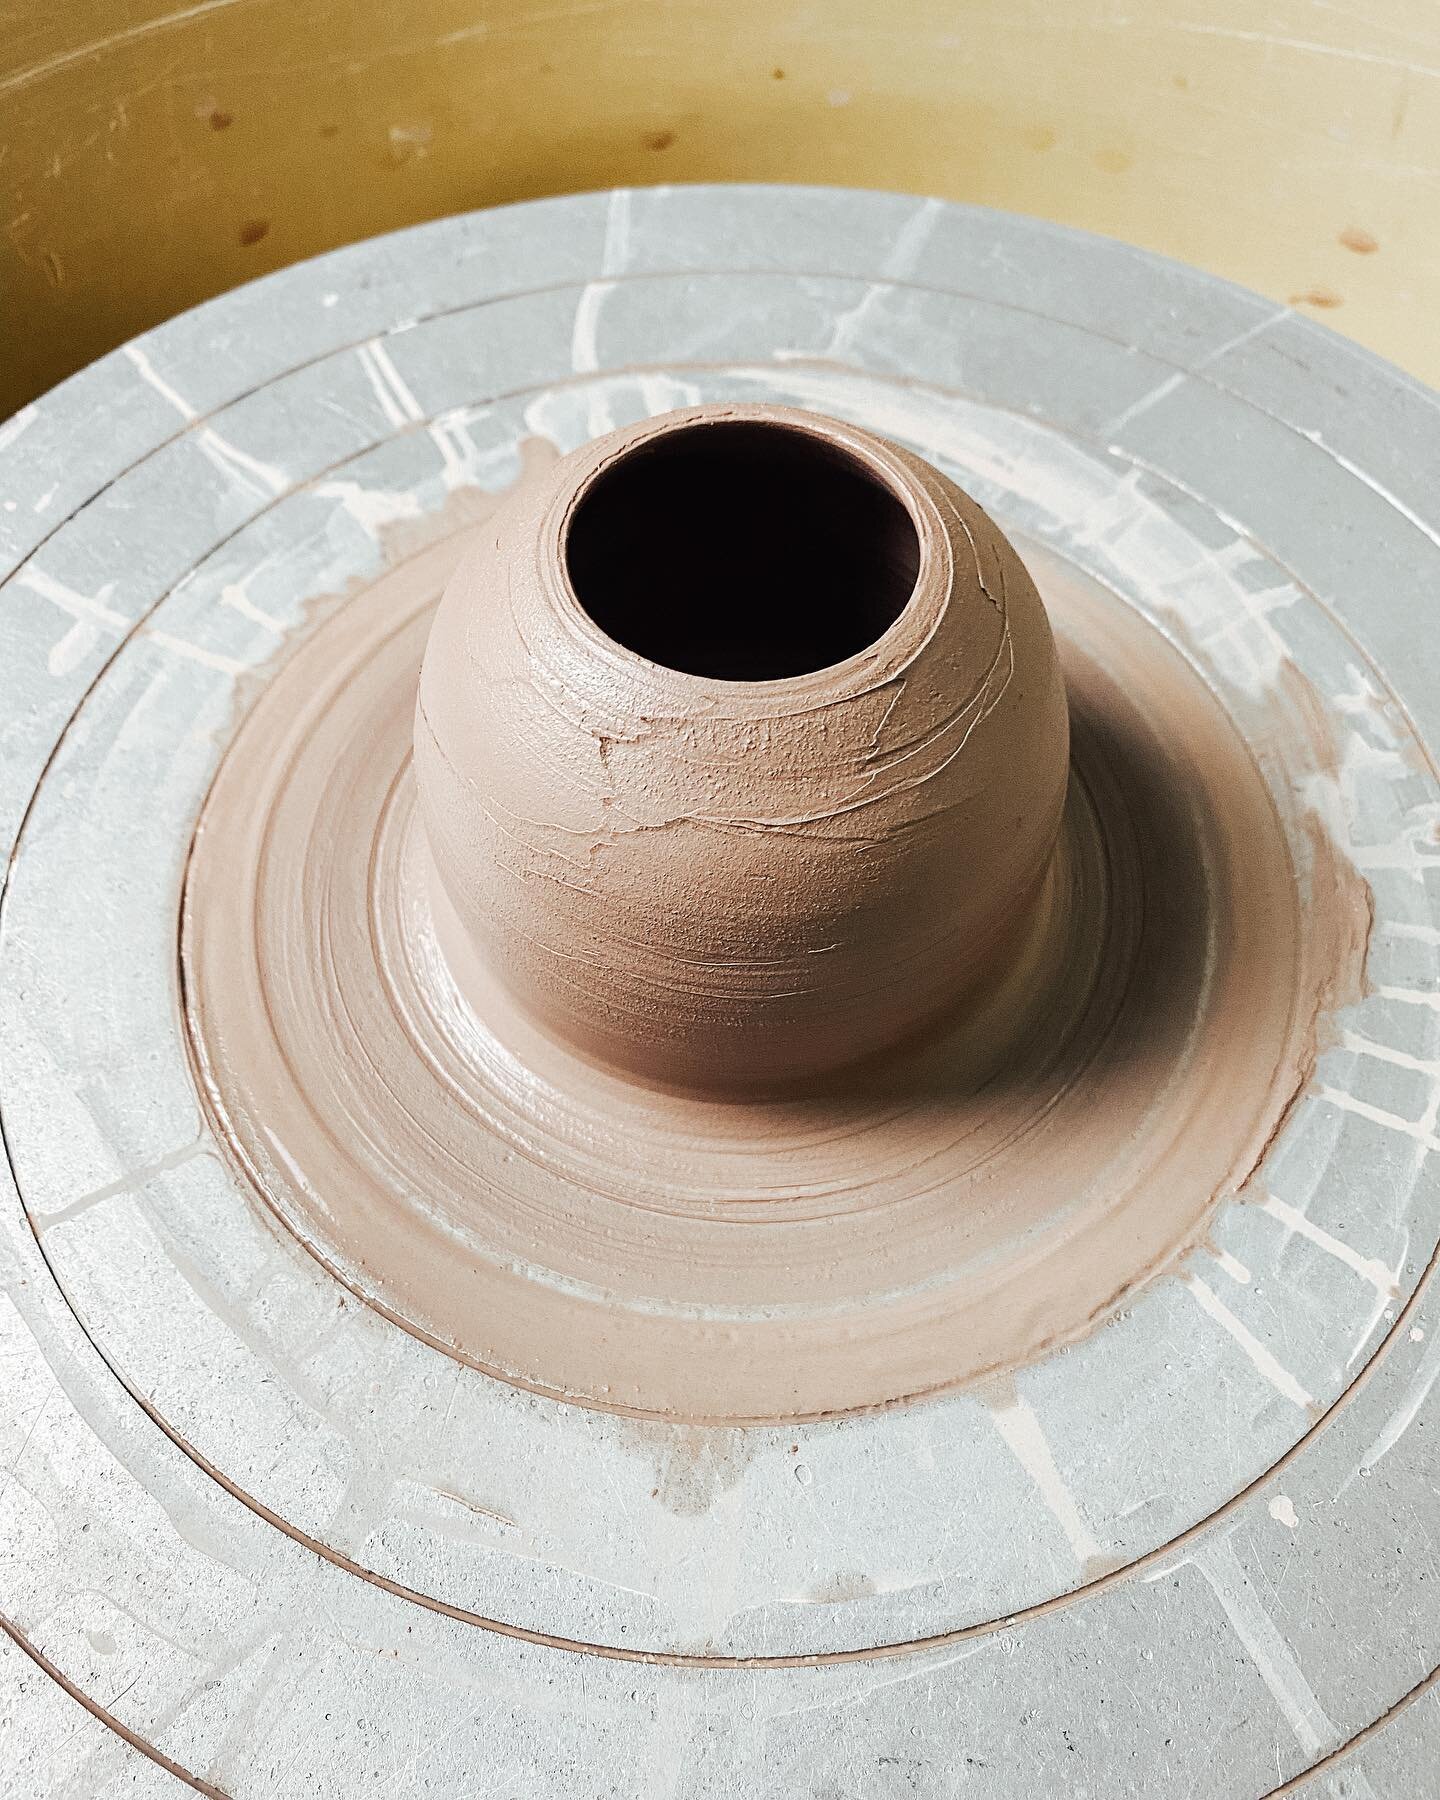 Let&rsquo;s talk about my pottery process. 

You might have noticed none of my work ever looks exactly the same...no two bowls are ever the same, no two pots match, etc. 

This is how I keep loving my work and &ldquo;doing it for the process.&rdquo; 